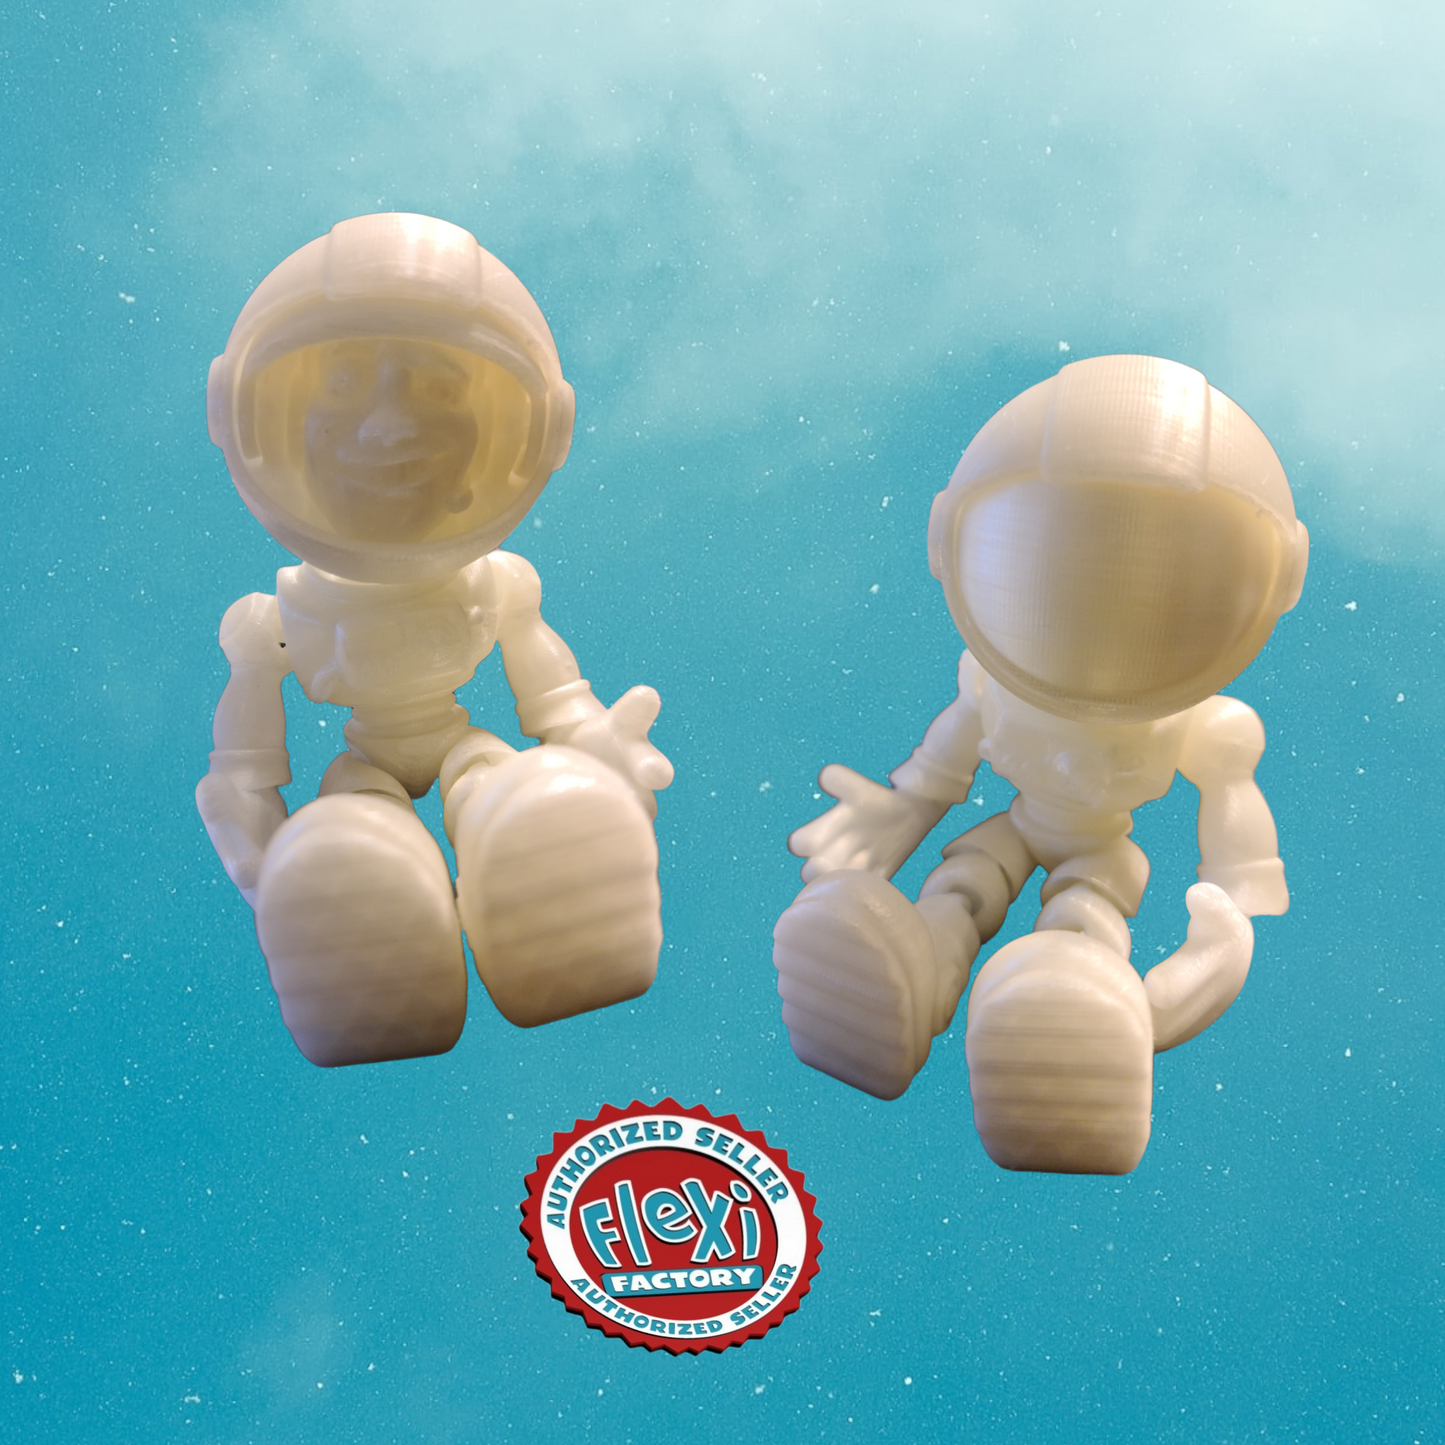 3d print astronaut for a child, Easter basket stuffer for kids, adult birthday gift, glow in the dark toy, space themed birthday party favor